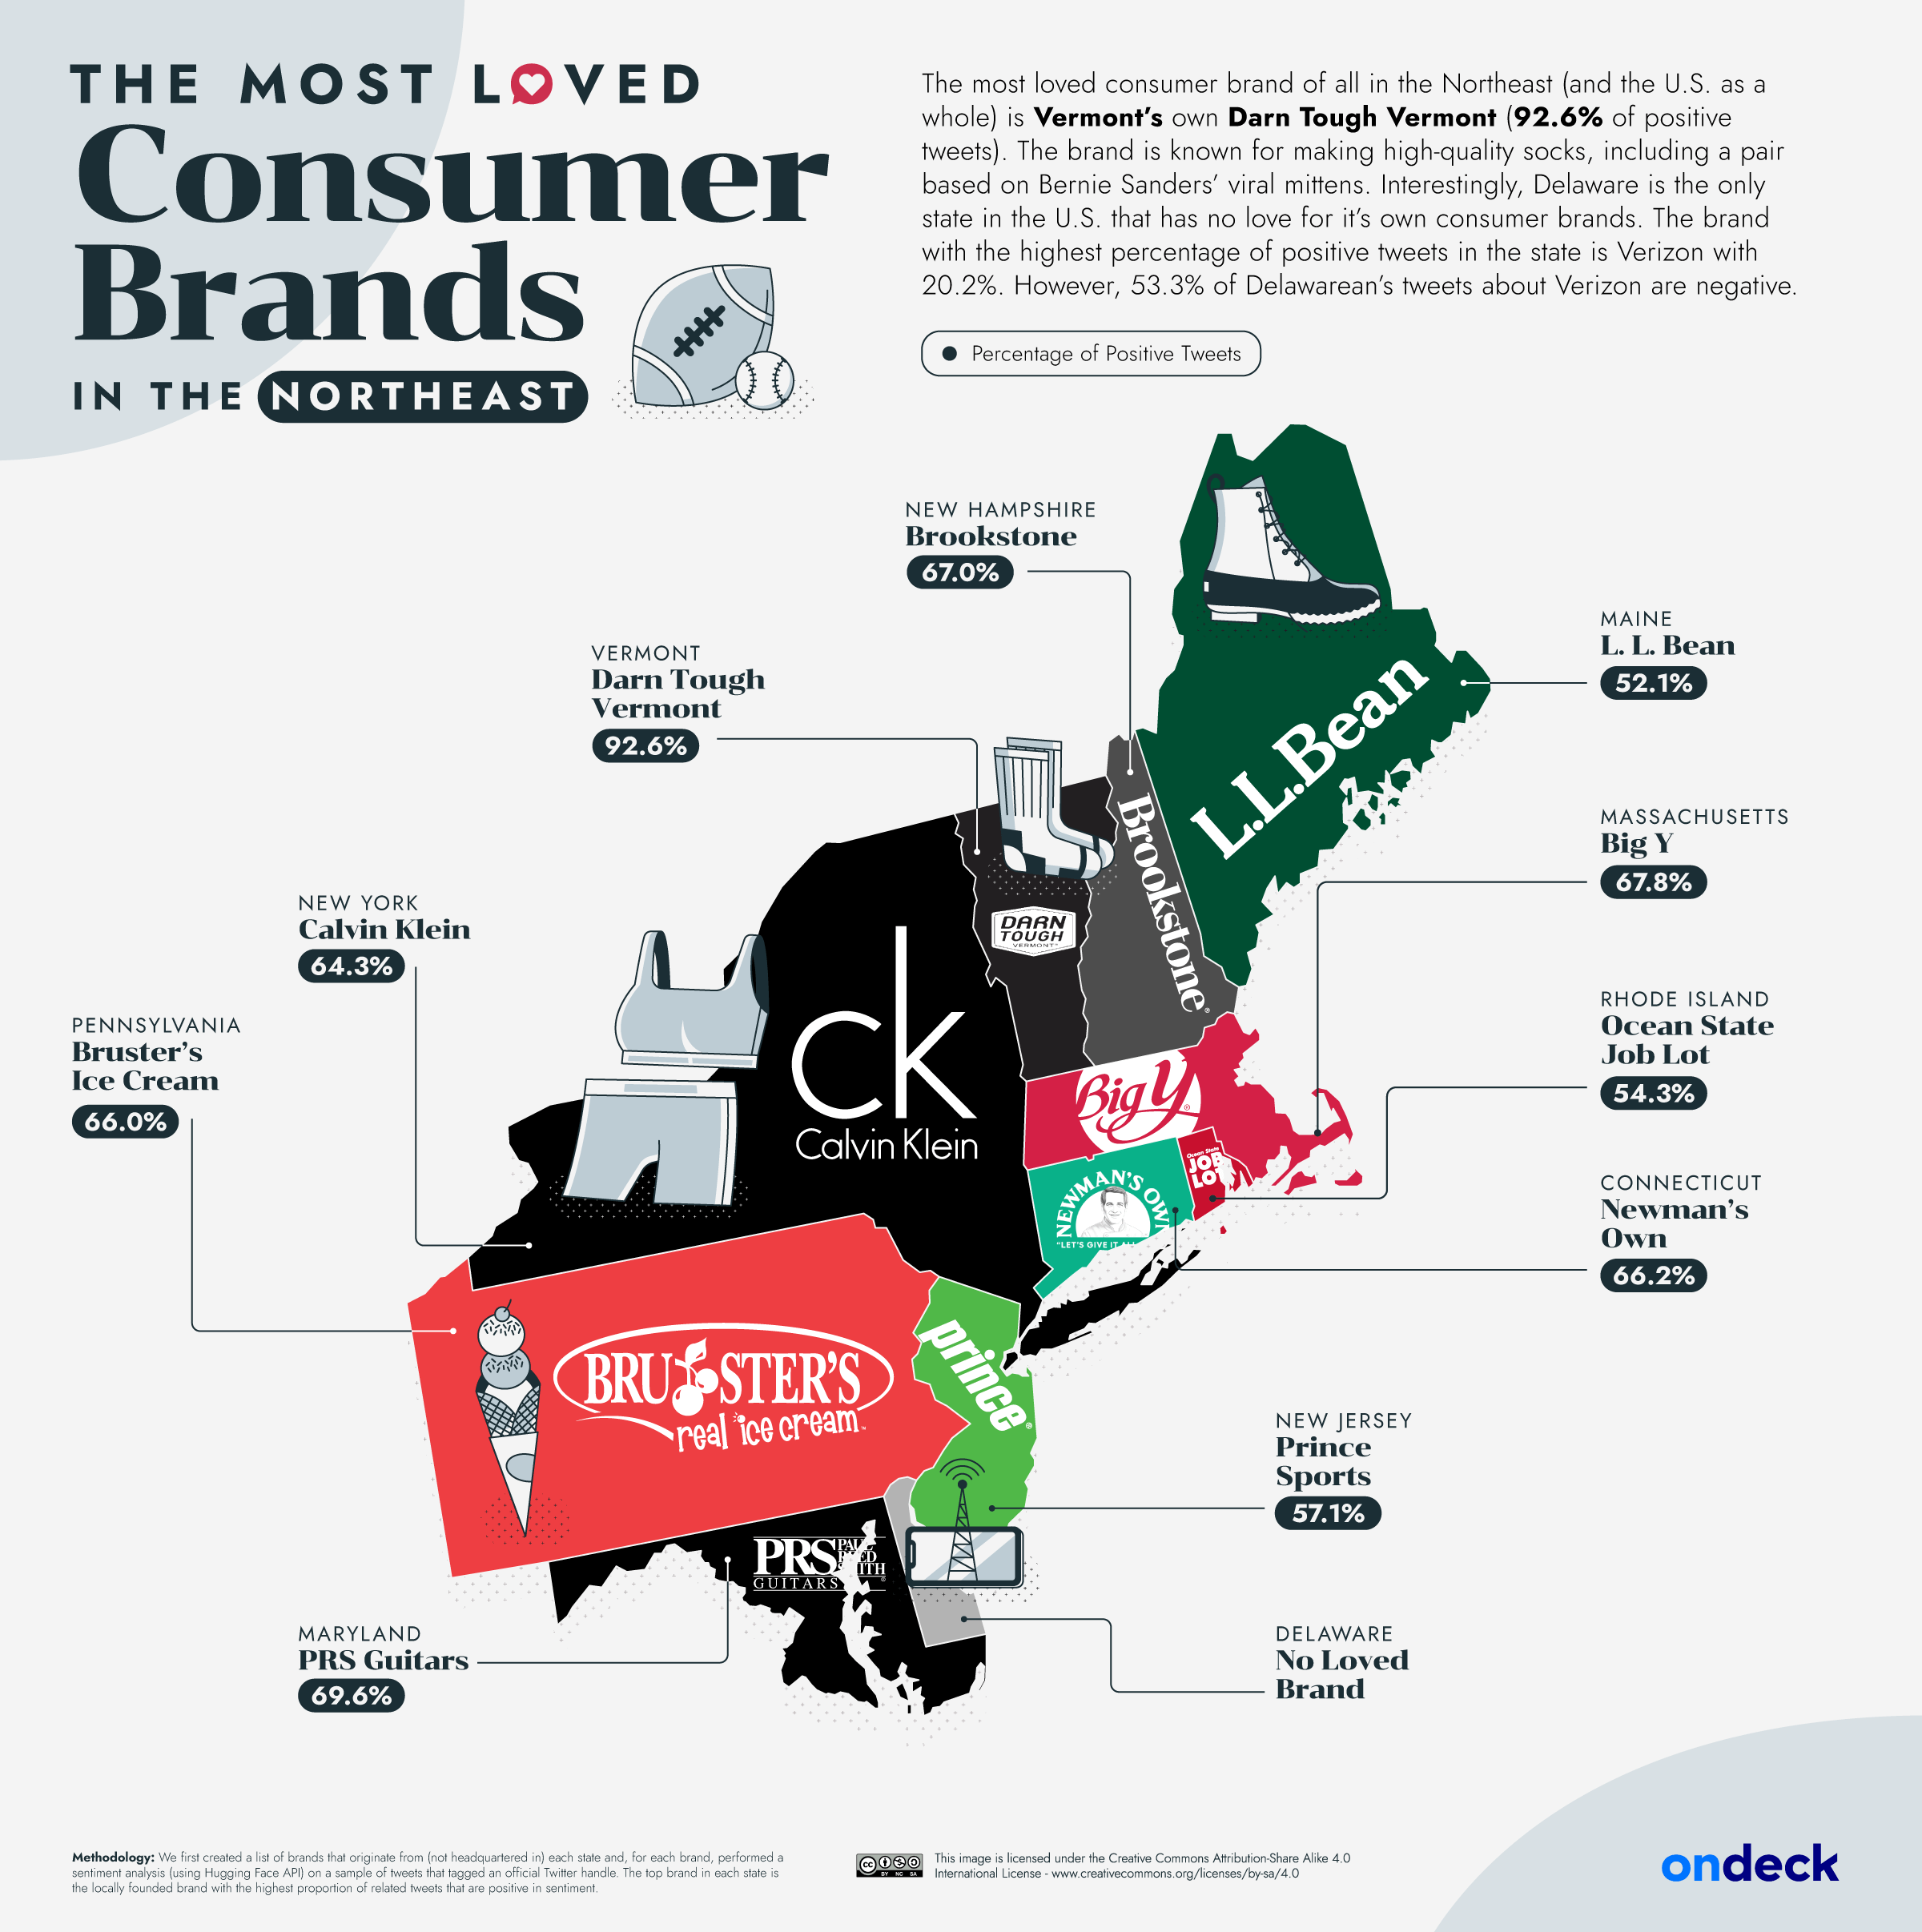 The Most Loved Consumer Brands From Every State, Based on 2 Million Tweets